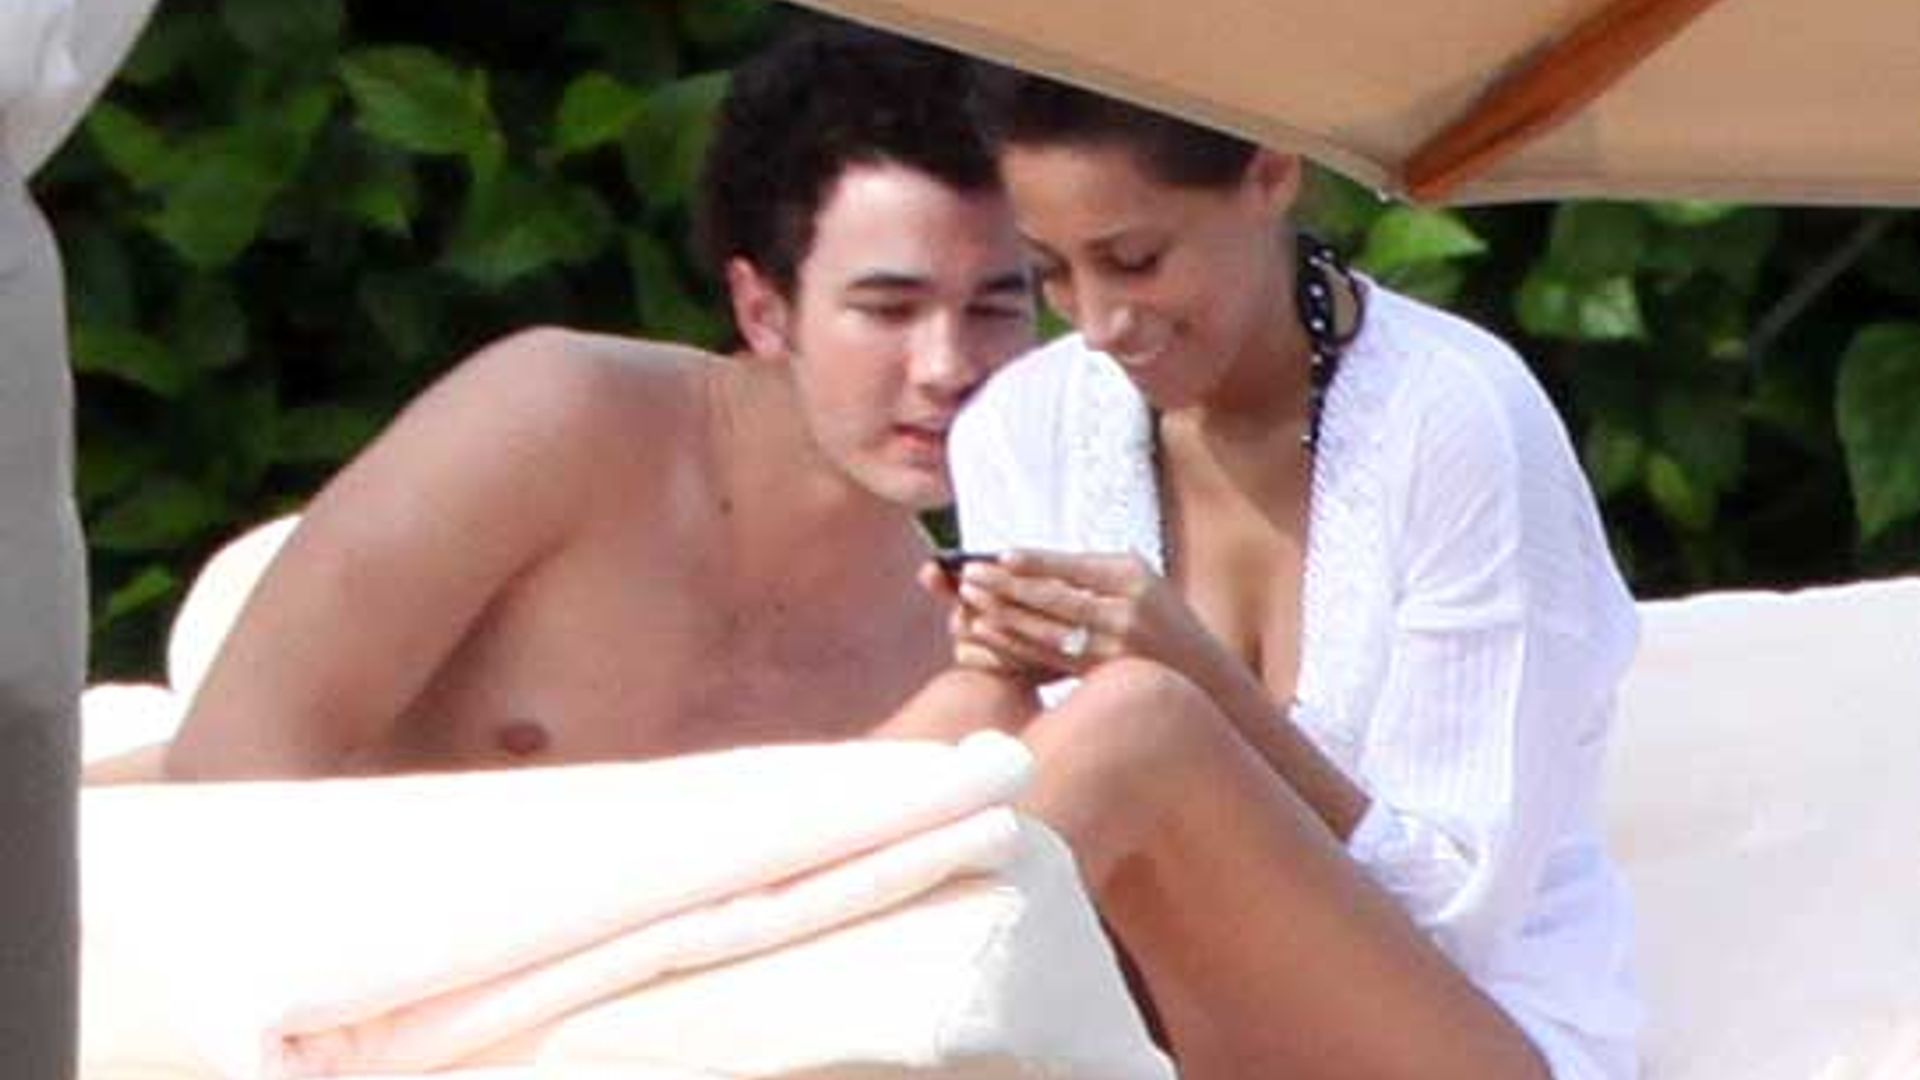 Kevin Jonas Engaged - Announcement sent directly to millions of